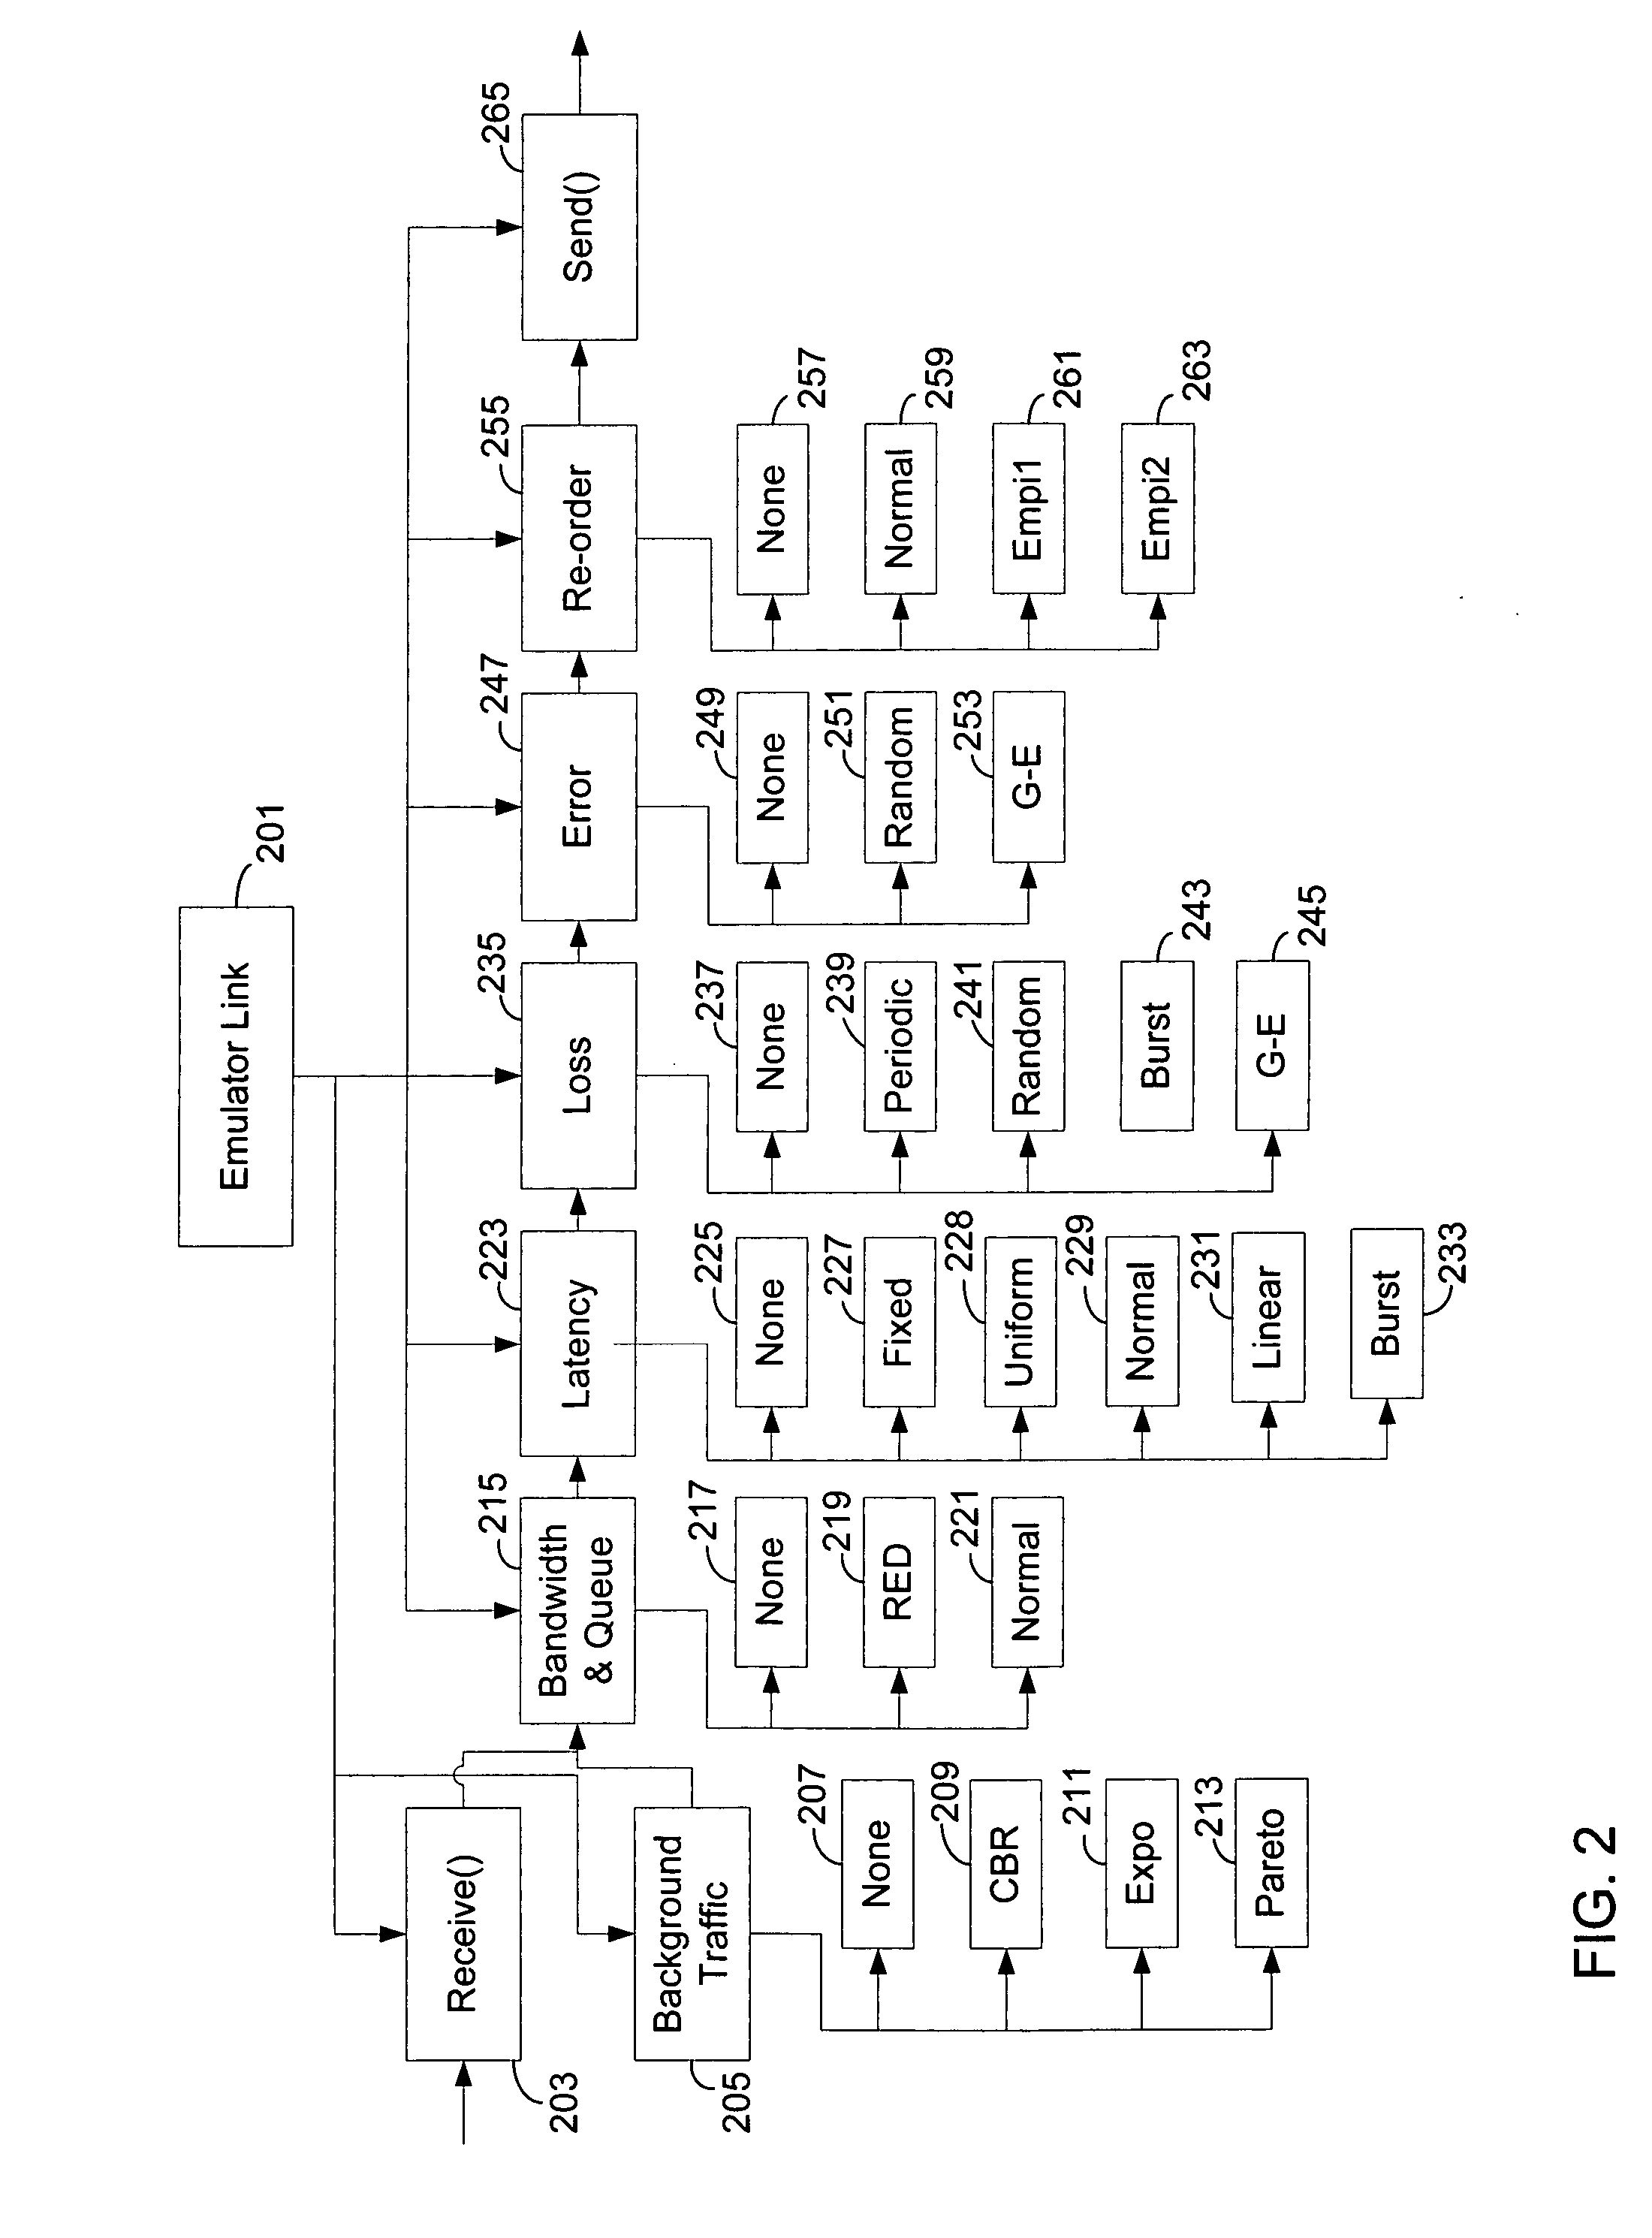 Method and system for network emulation using packet reorder emulation techniques